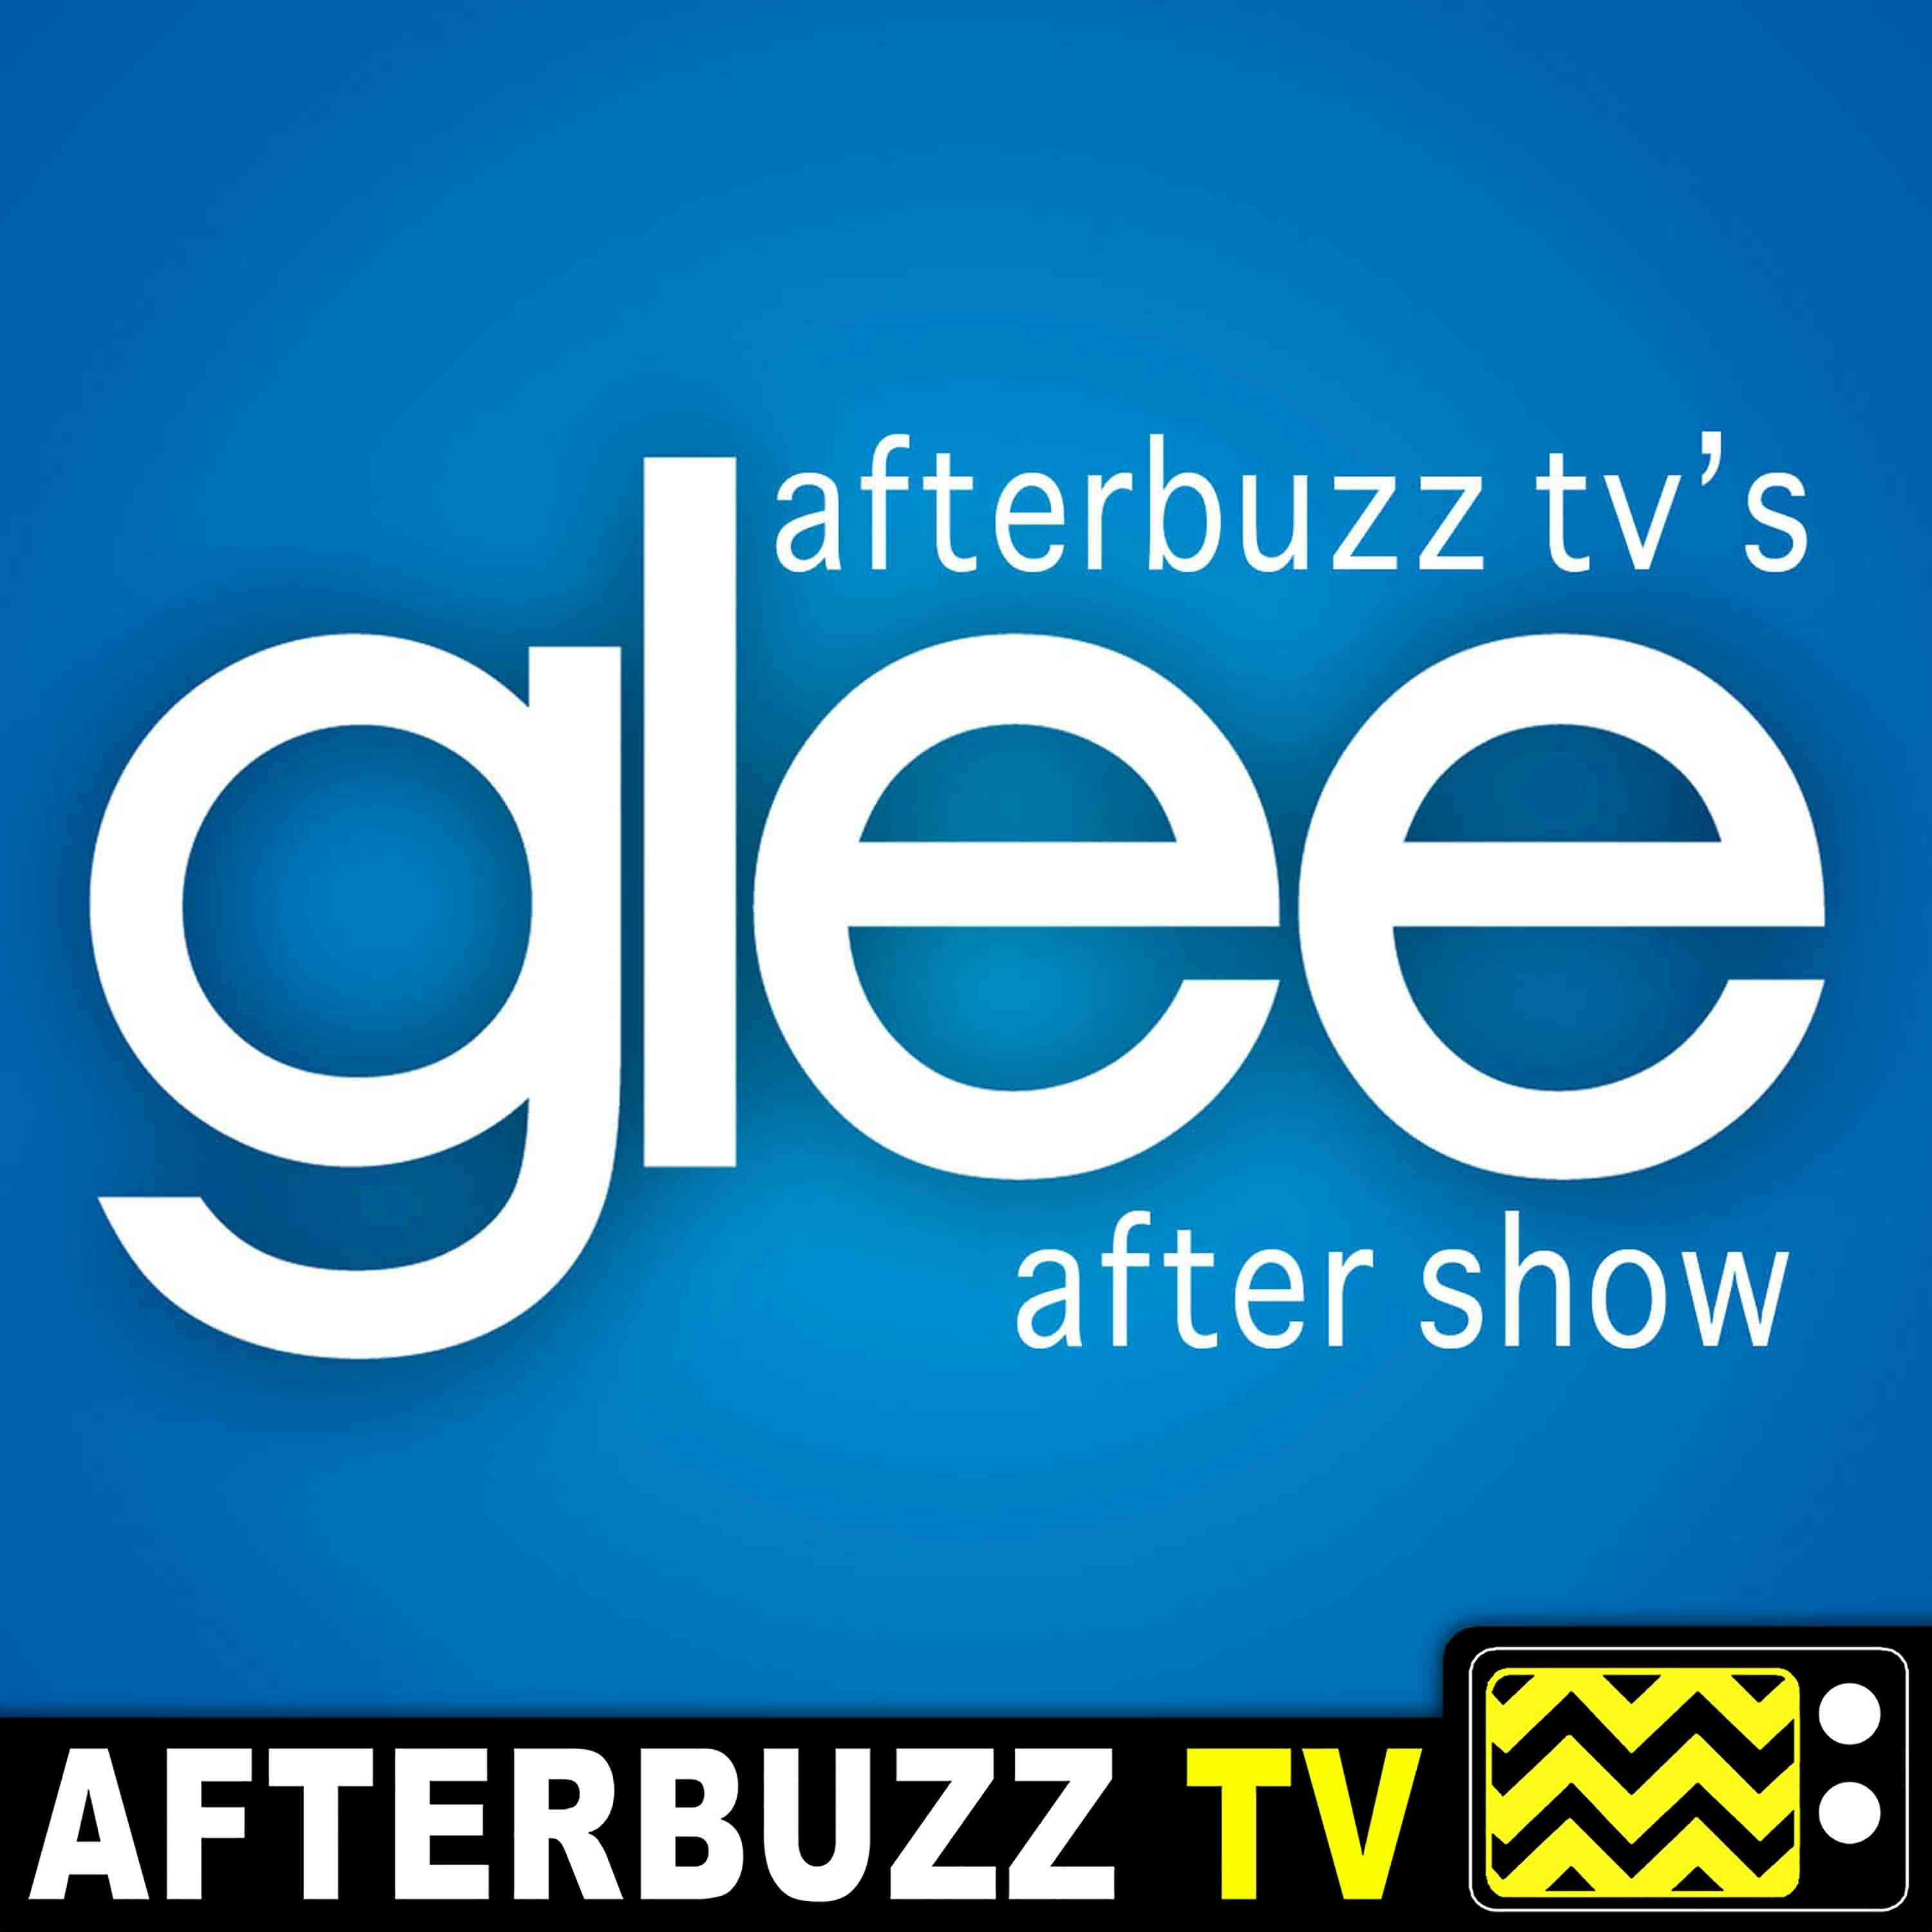 Glee S:6 | JJ Totah Guests on The Rise And Fall Of Sue Sylvester E:10 | AfterBuzz TV AfterShow